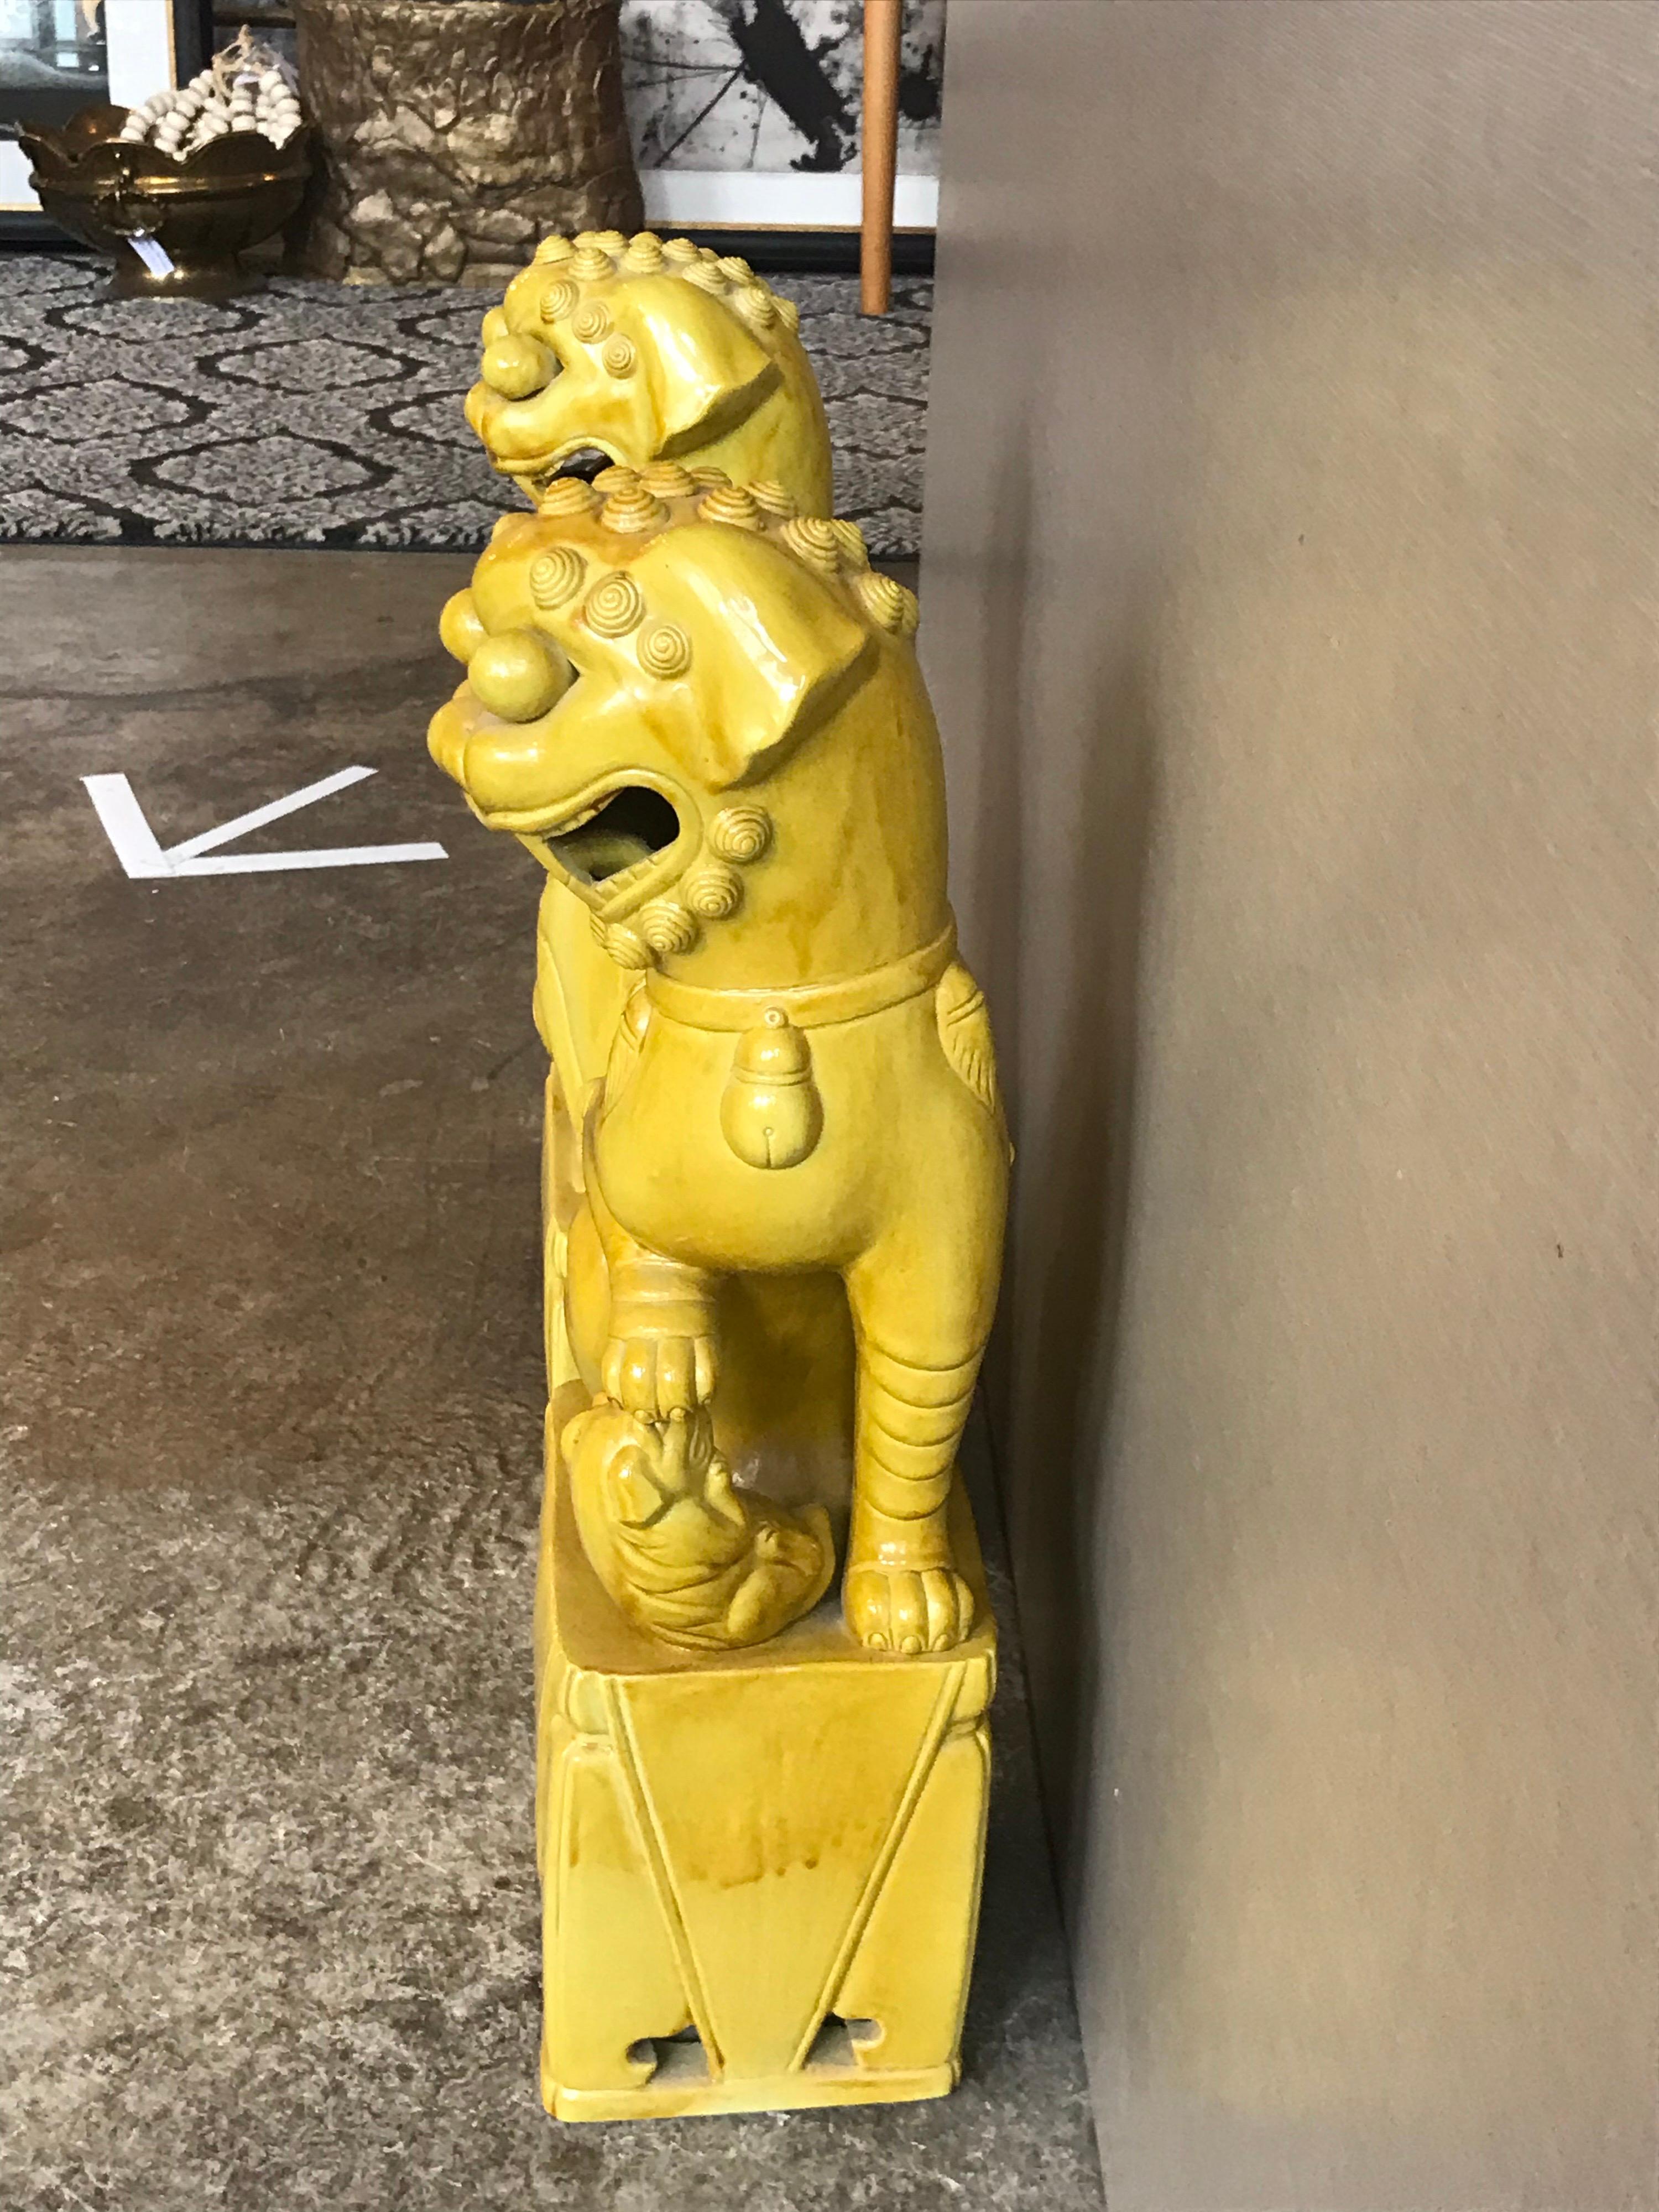 This is a pair of yellow glazed vintage Japanese Foo dogs from the 1970s-1980s.